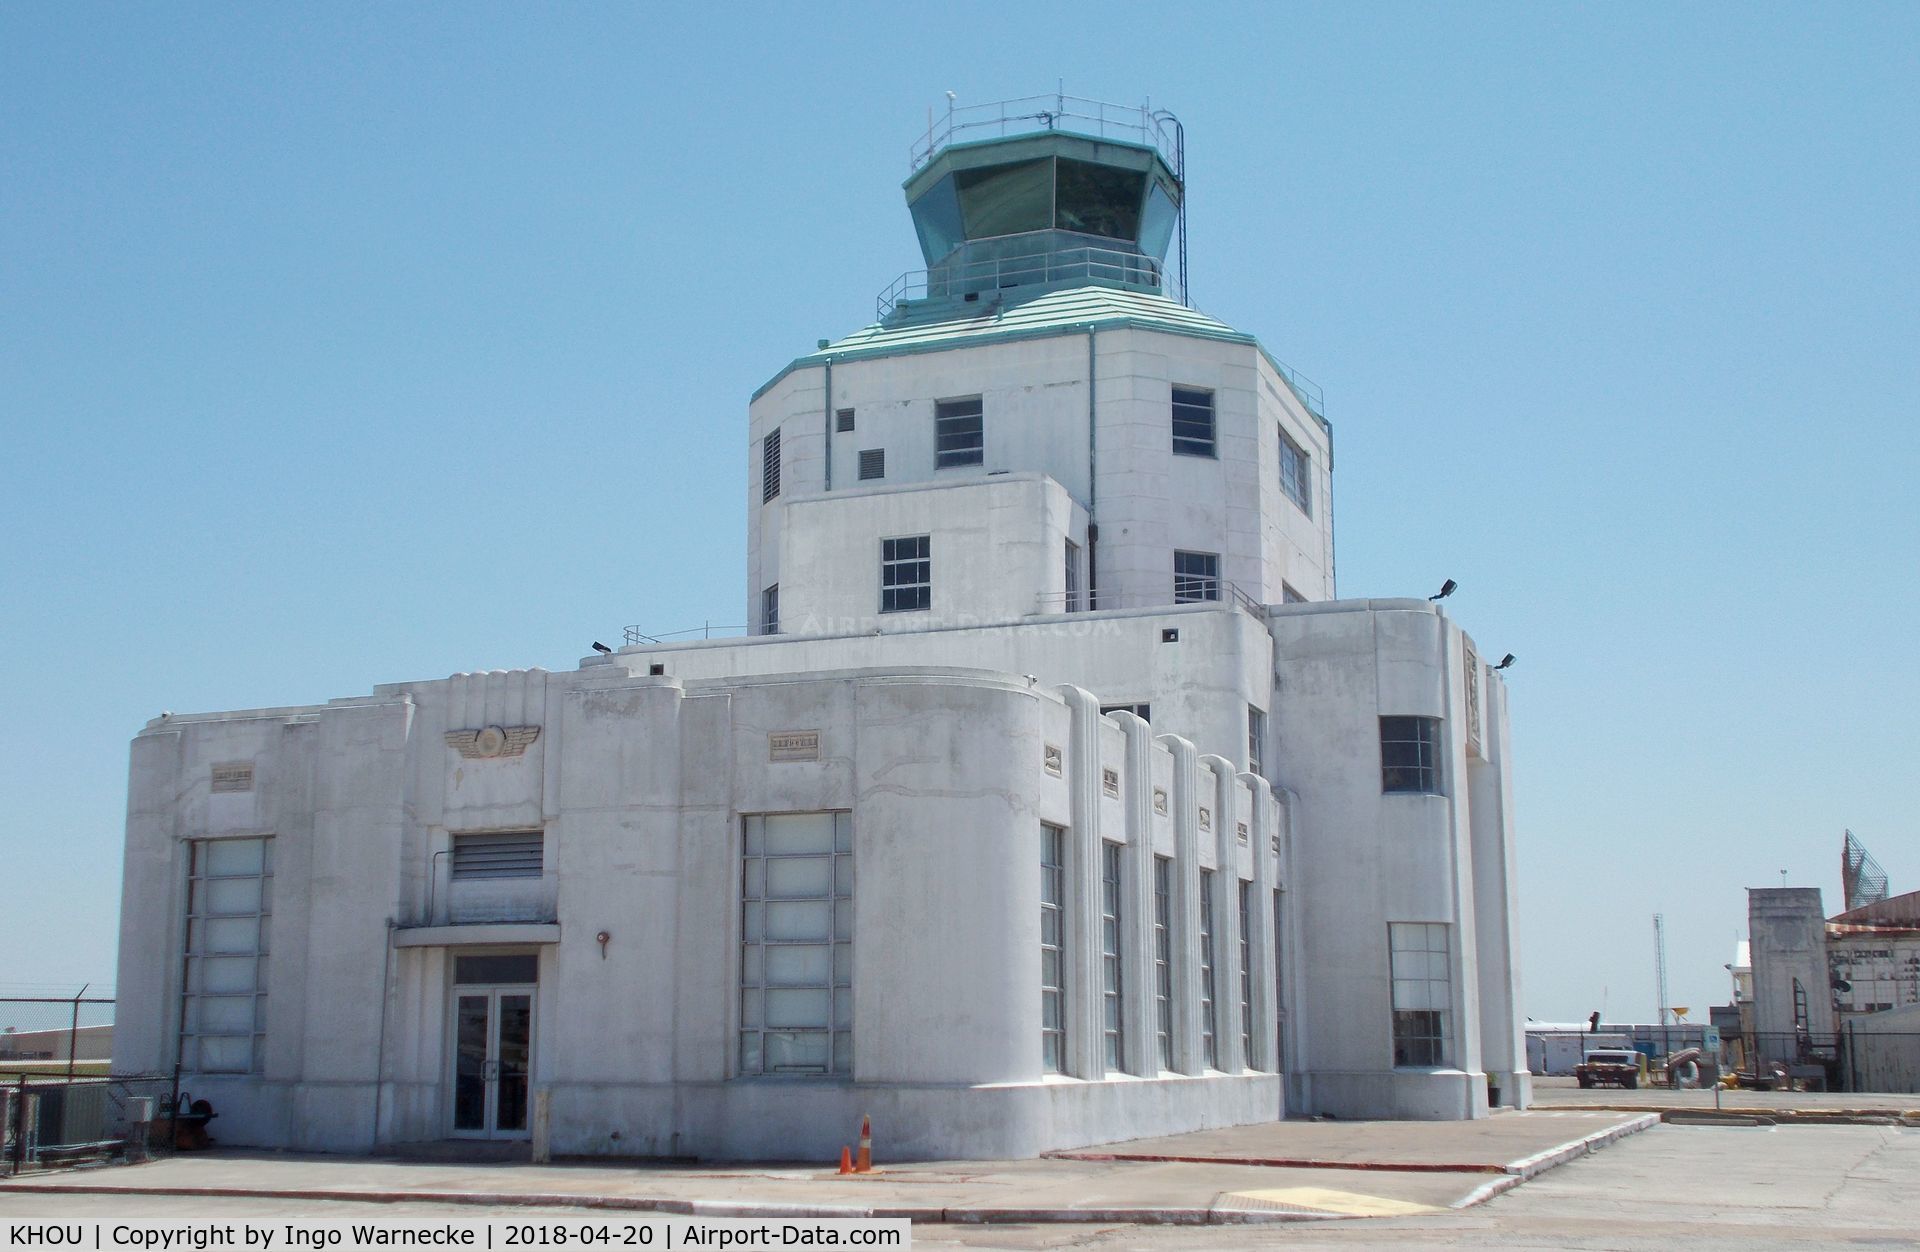 William P Hobby Airport (HOU) - the Houston Municipal Airport terminal building - restored and maintained by volunteers and staff of the 1940 Air Terminal Museum